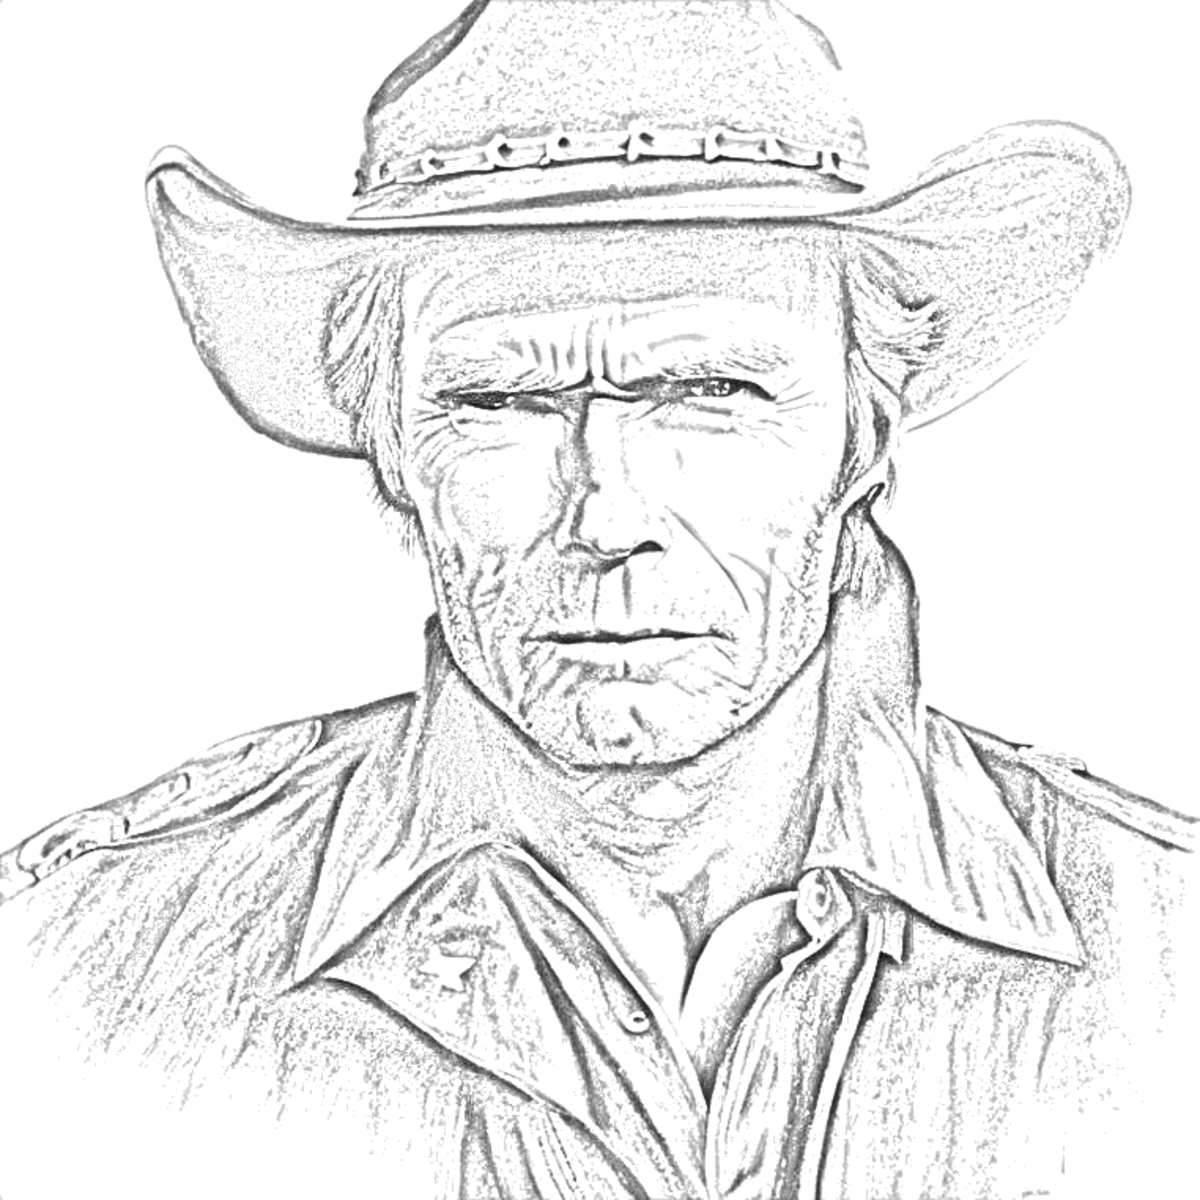 Image to Sketch - Pencil Sketch and Caricature Online Free with AI